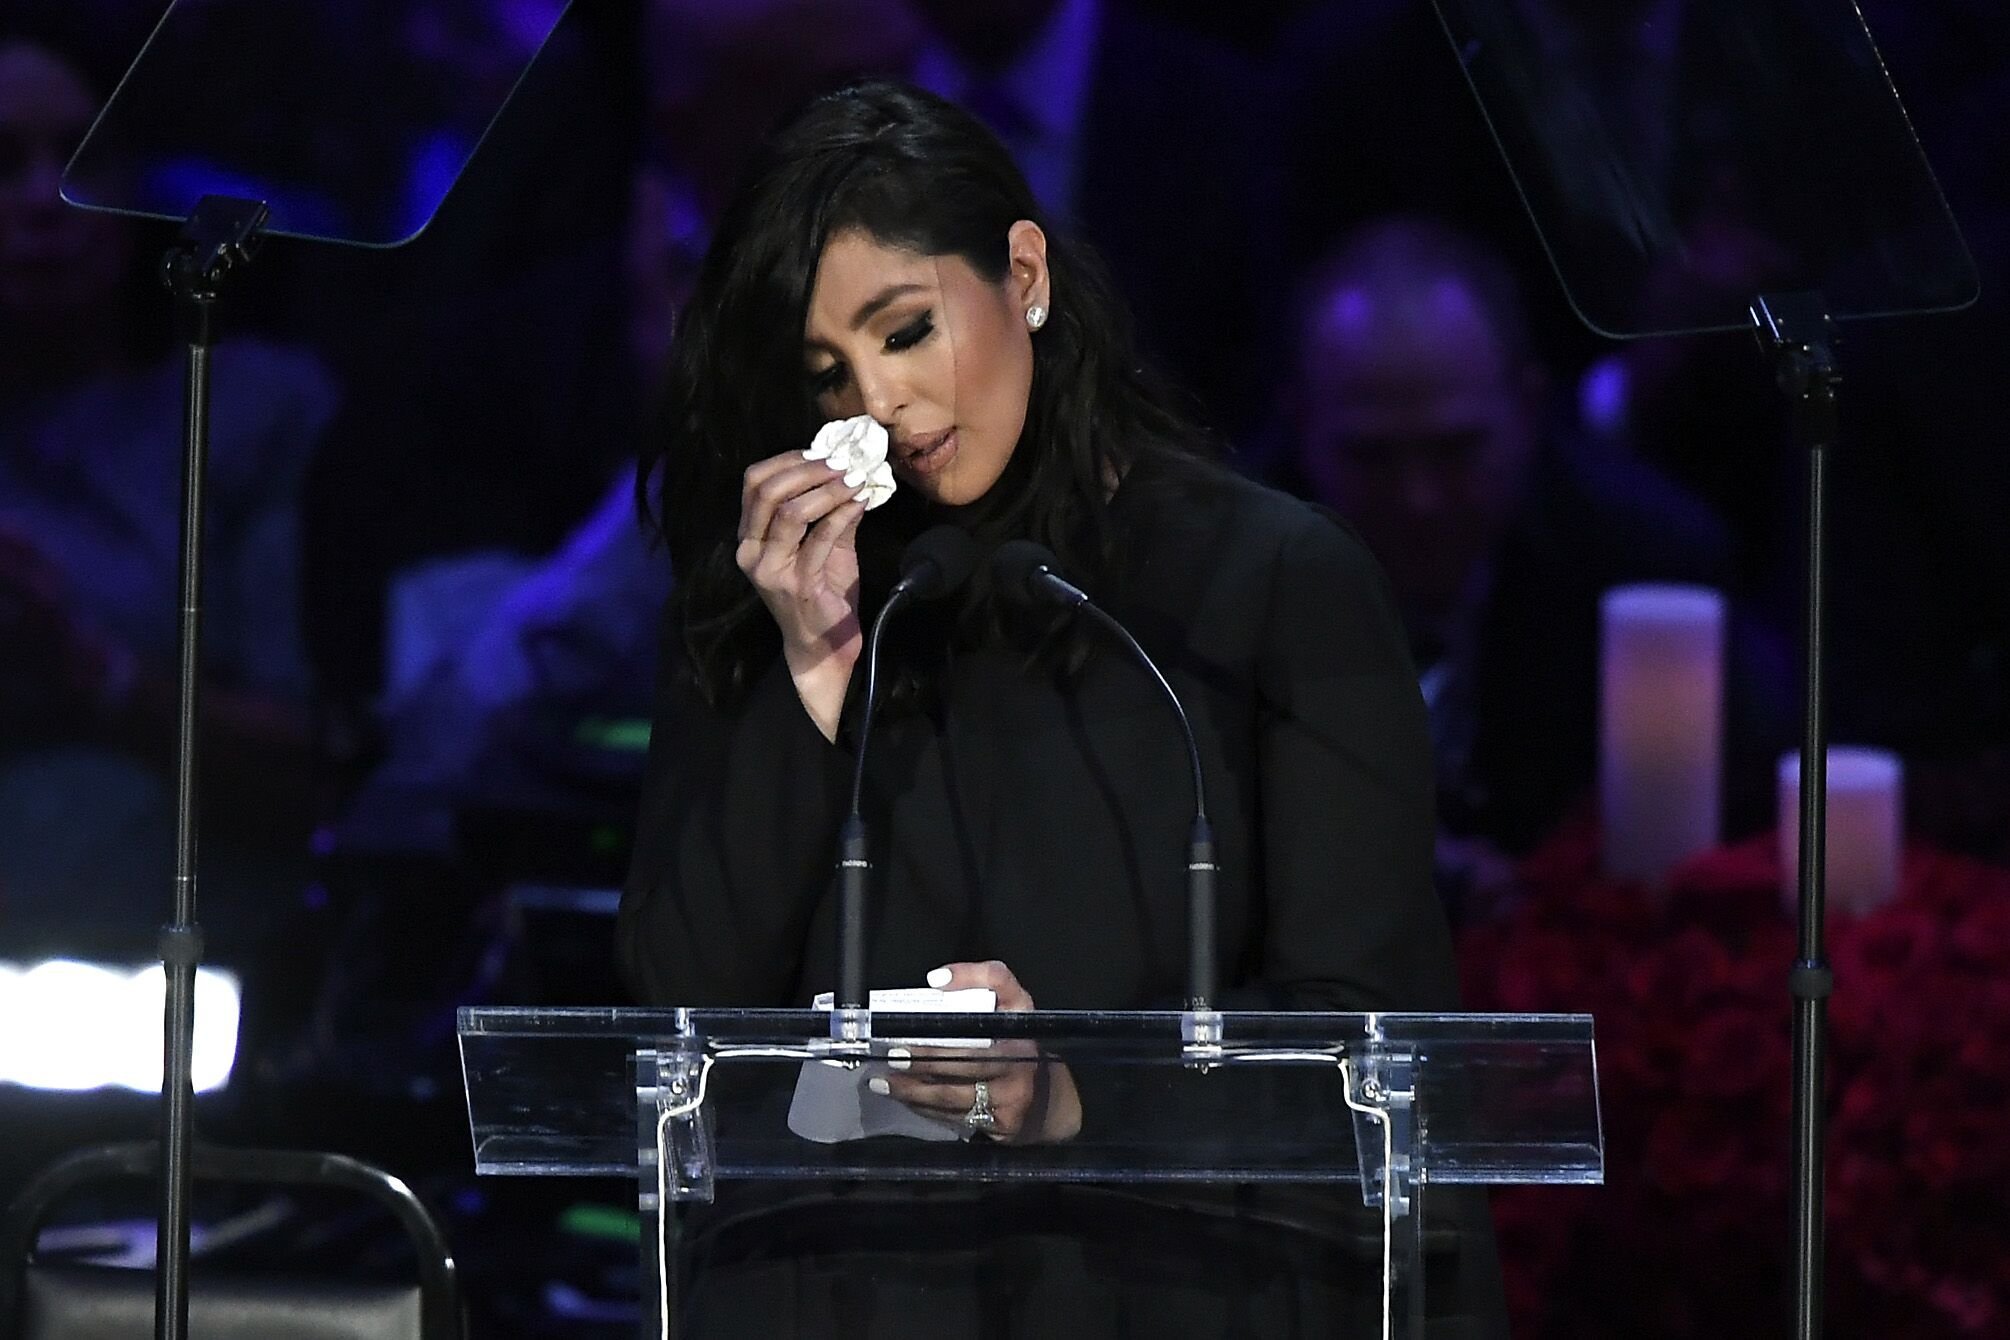 Vanessa Bryant speaks during The Celebration of Life for Kobe & Gianna Bryant at Staples Center on February 24, 2020 in Los Angeles, California | Photo: Getty Images